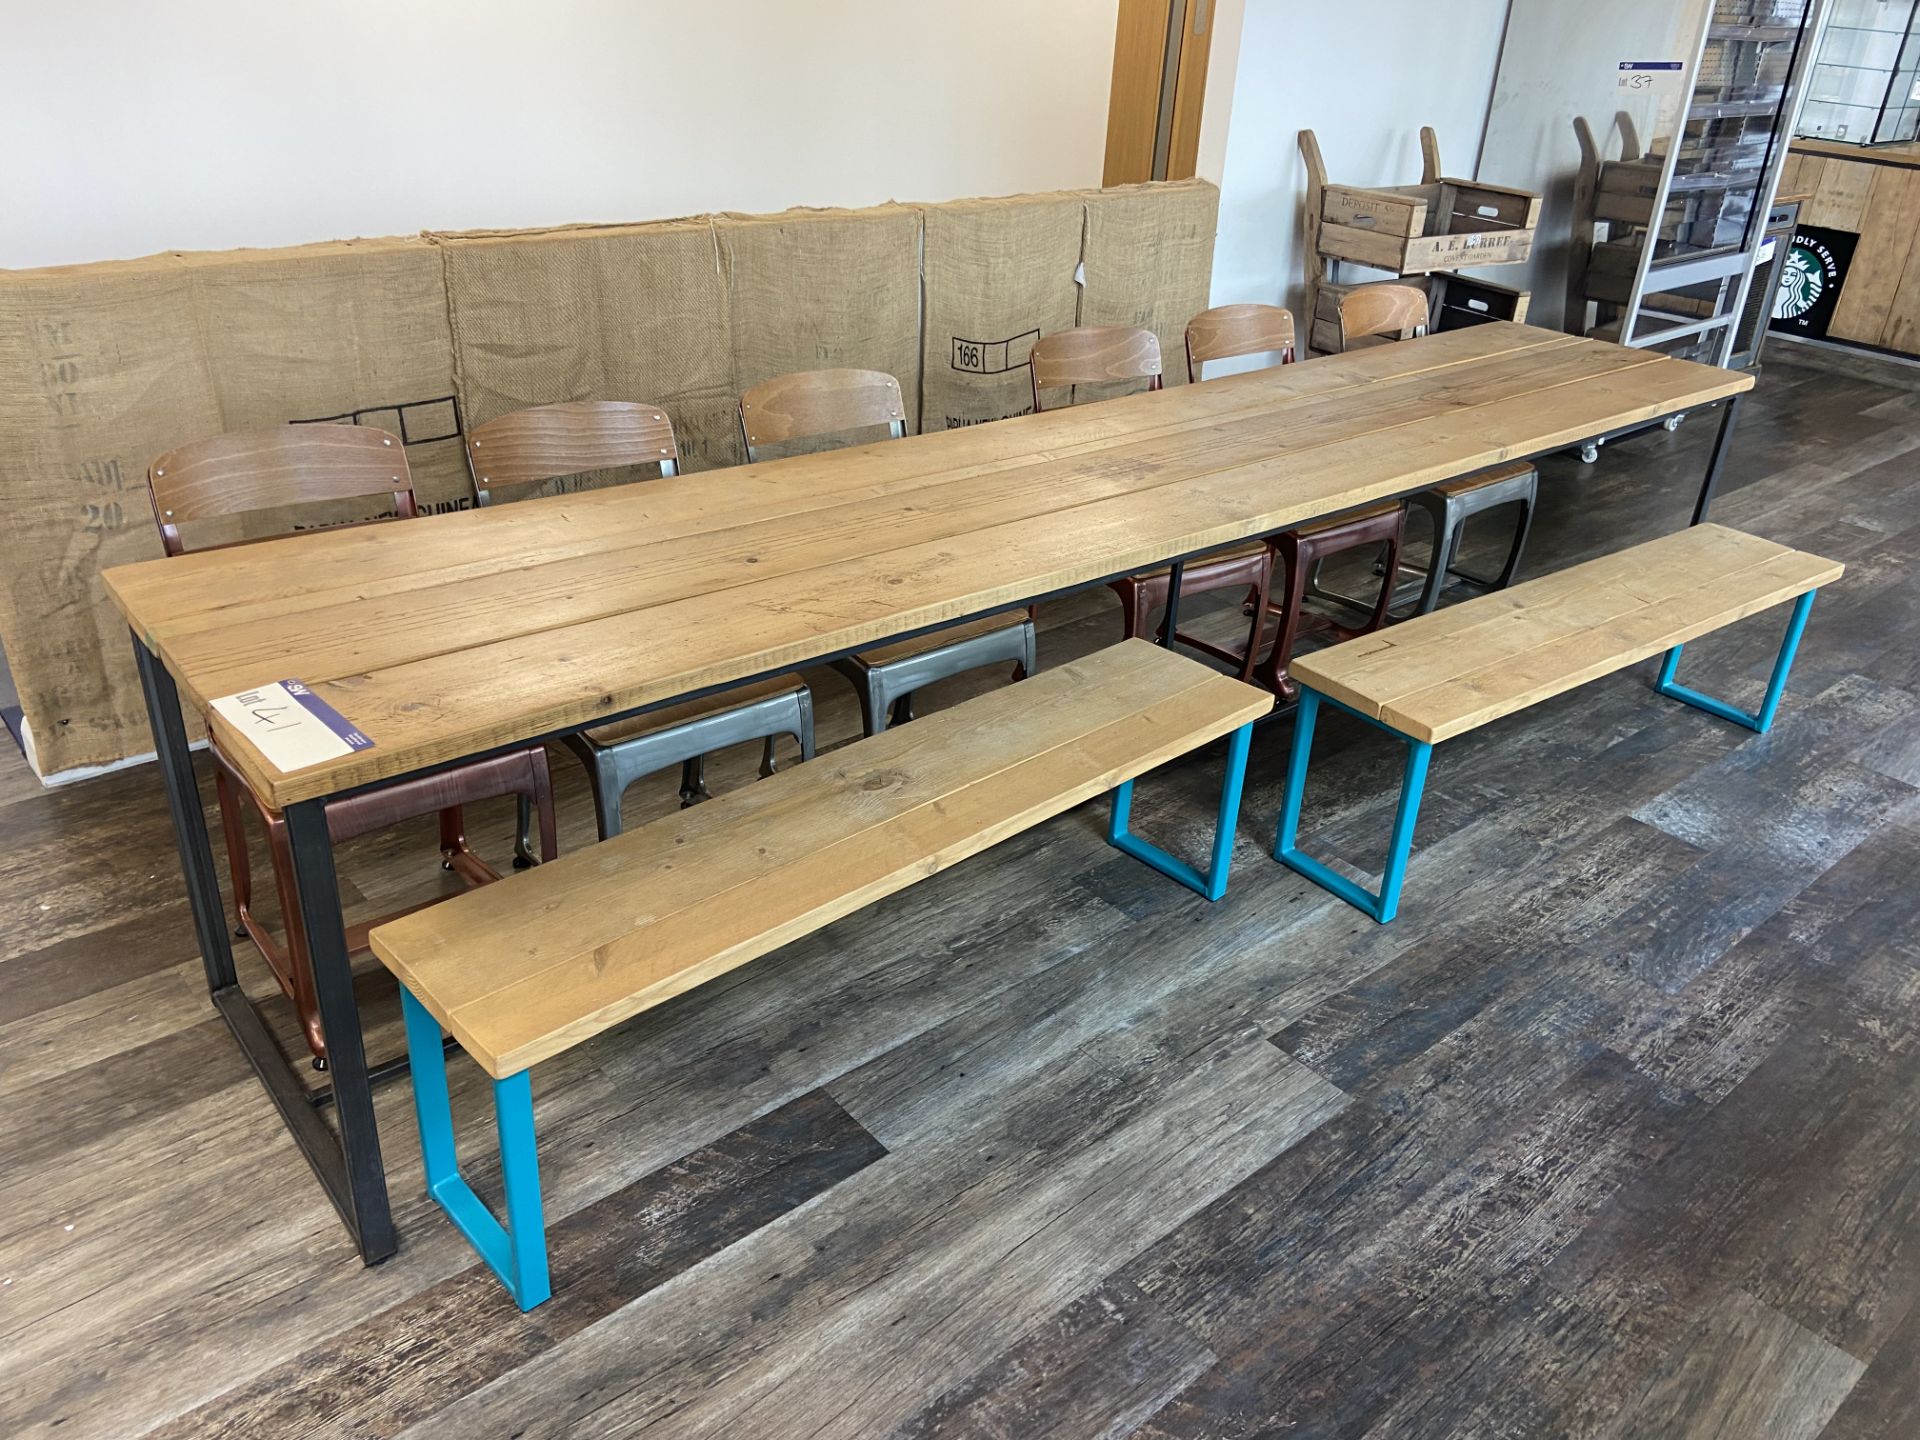 Steel Framed Laminated Top Dining Table, approx. 3.5m x 700mm x 750mm high, with six steel framed